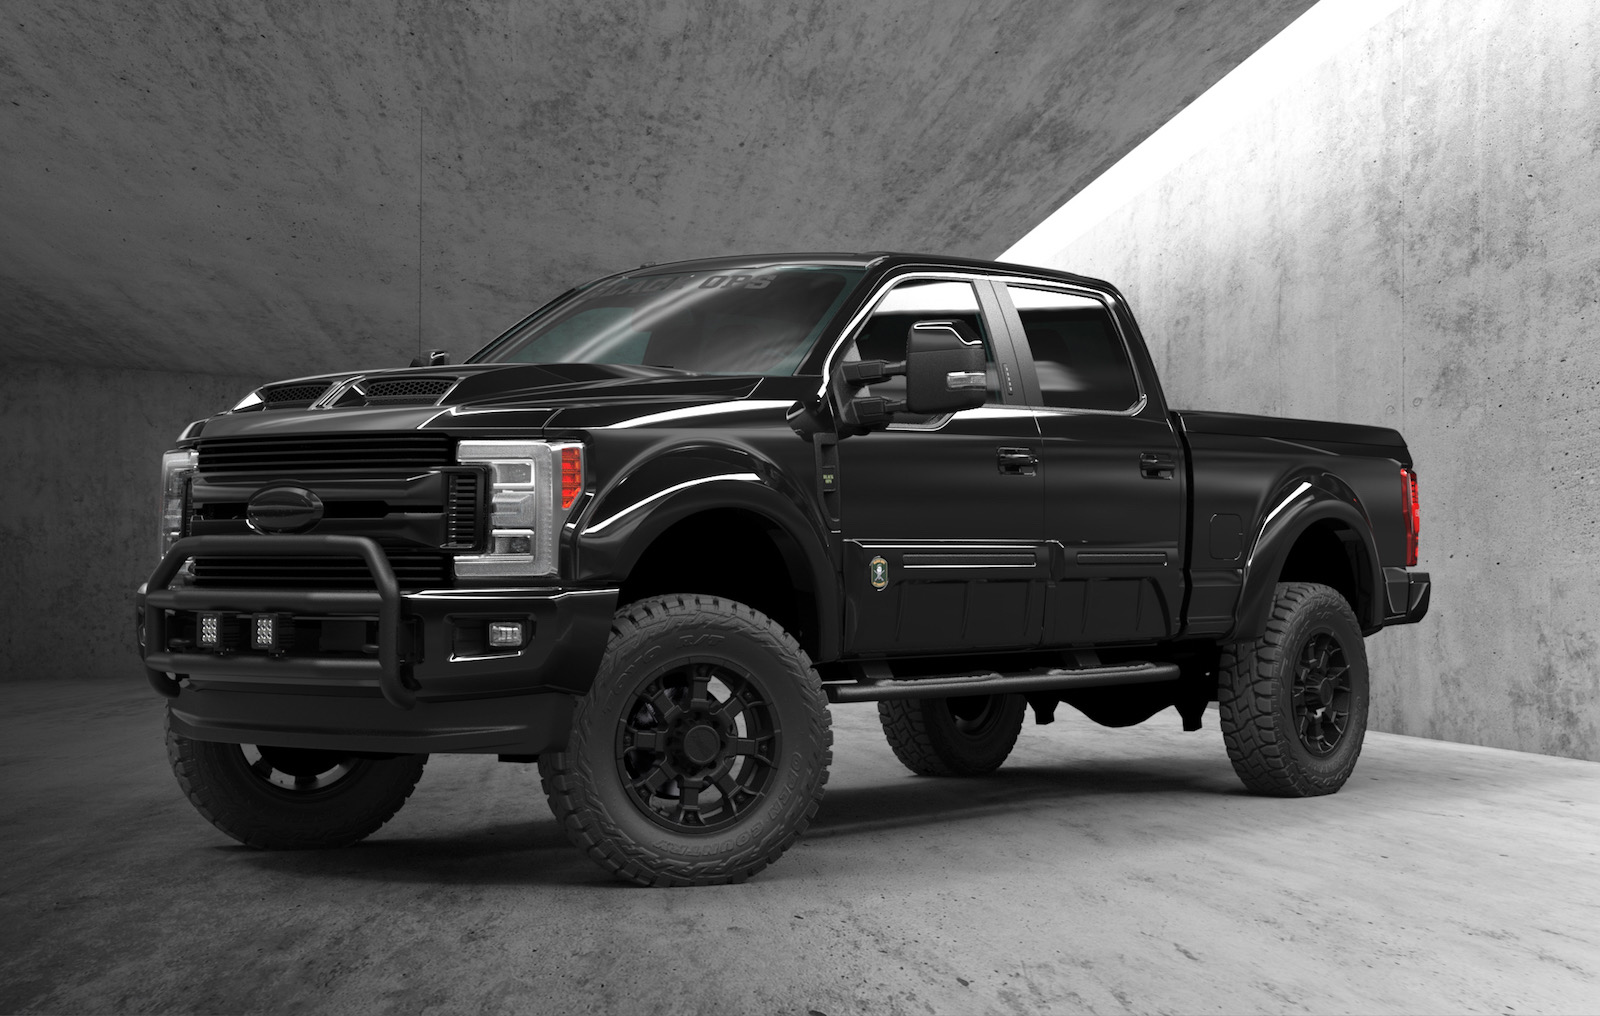 2018 Ford F-250 Tuscany Black Ops announced for Australia